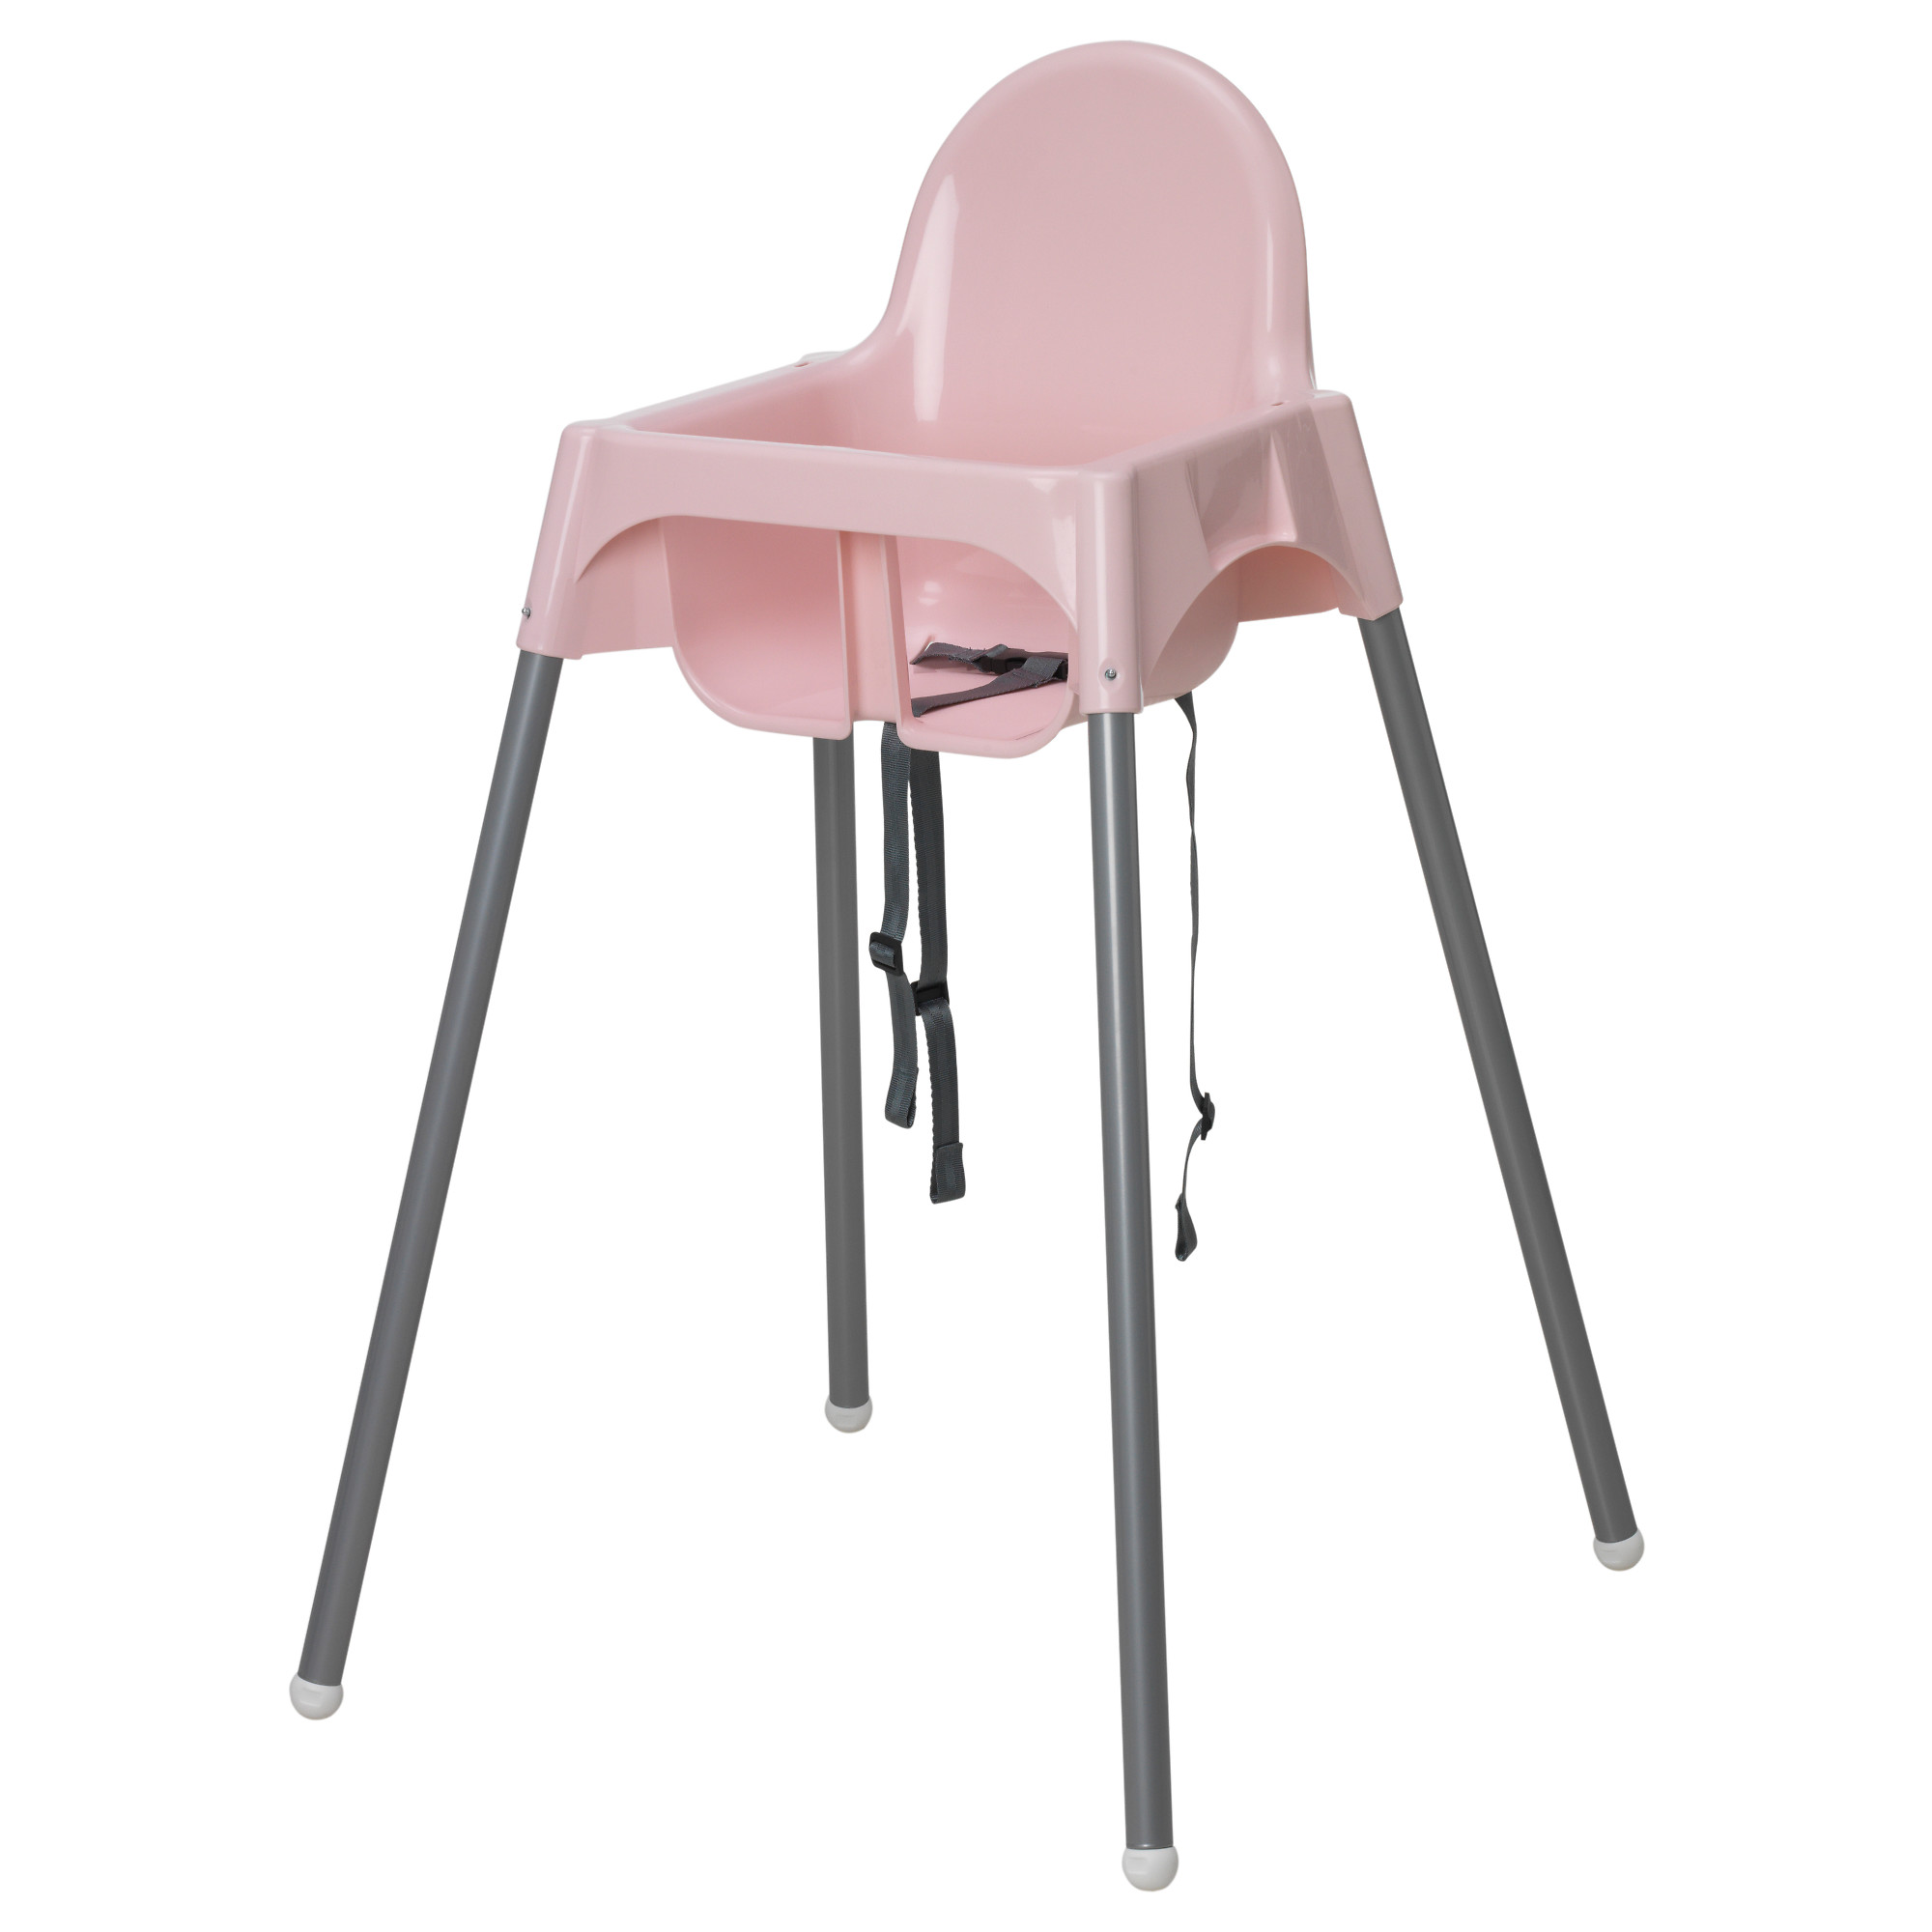 ANTILOP seat shell for highchair